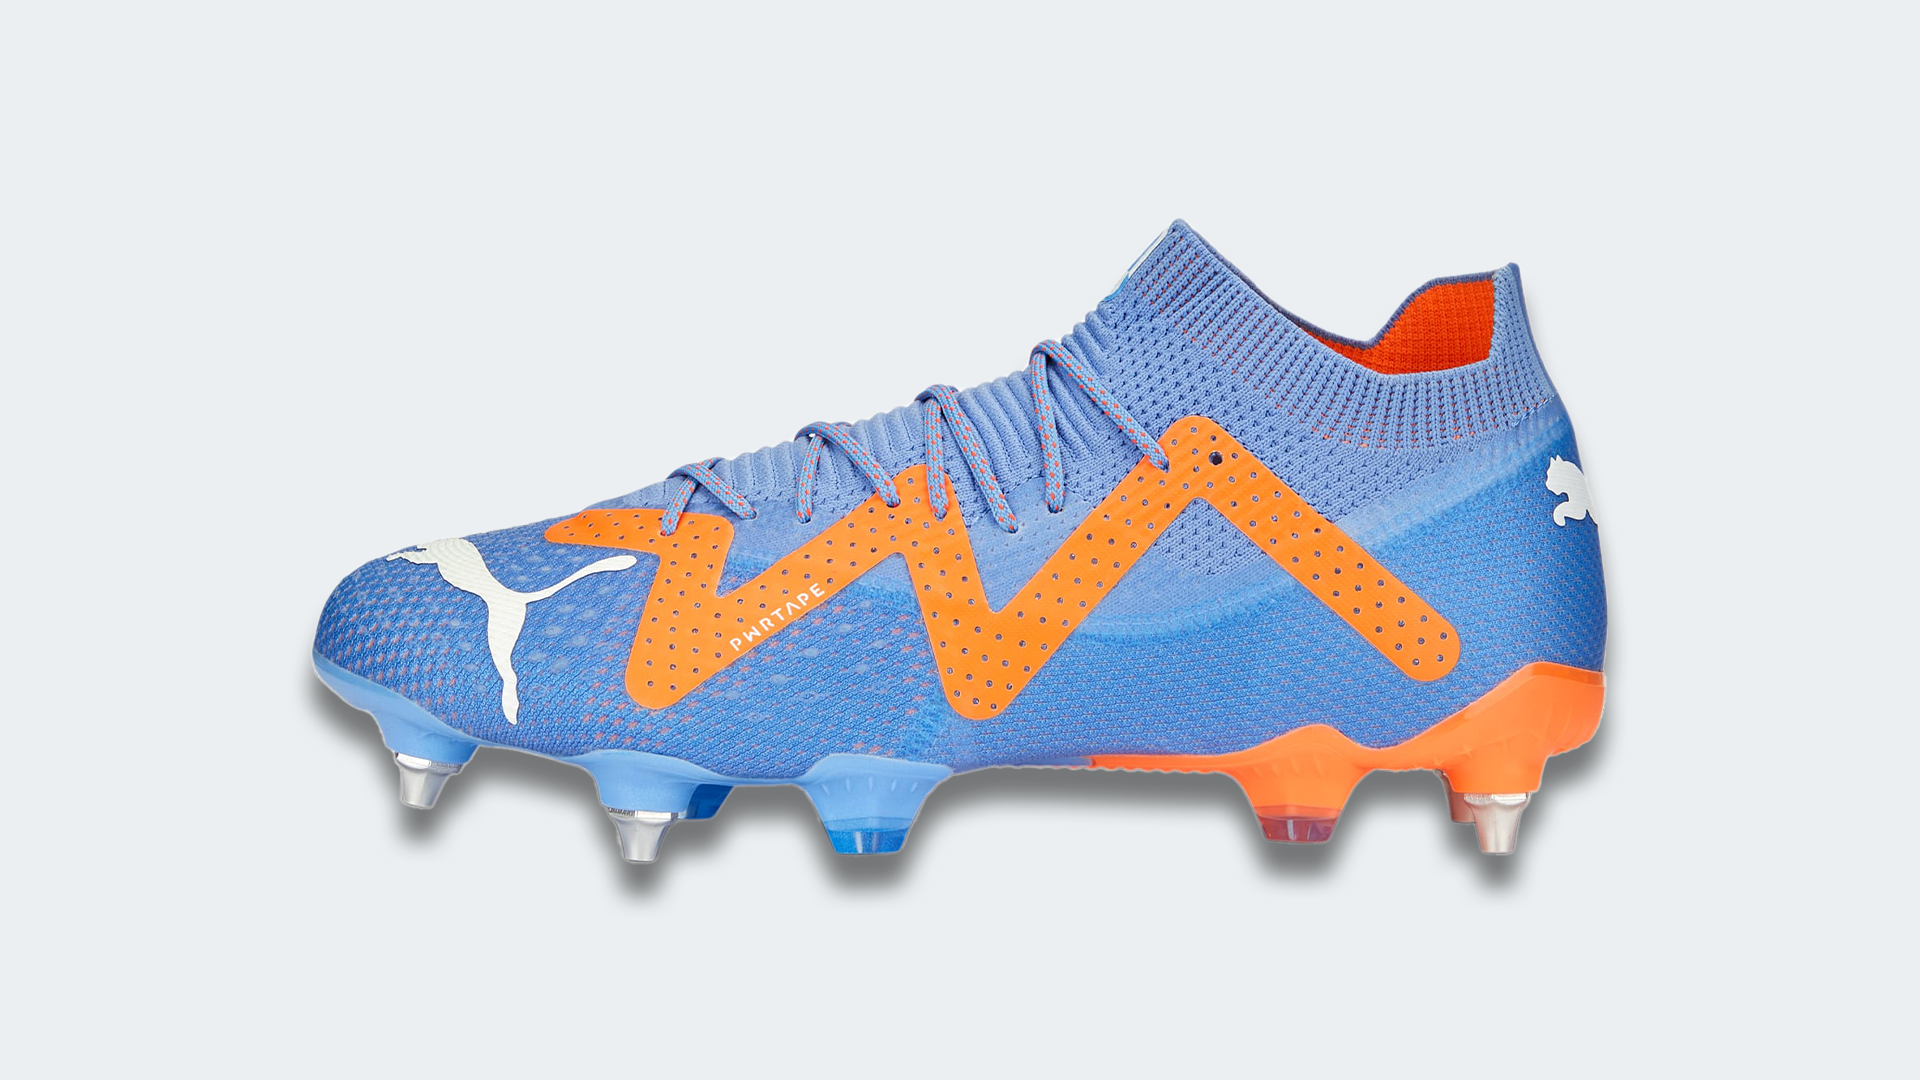 PUMA and Neymar Are Supercharging the Future with the next evolution of